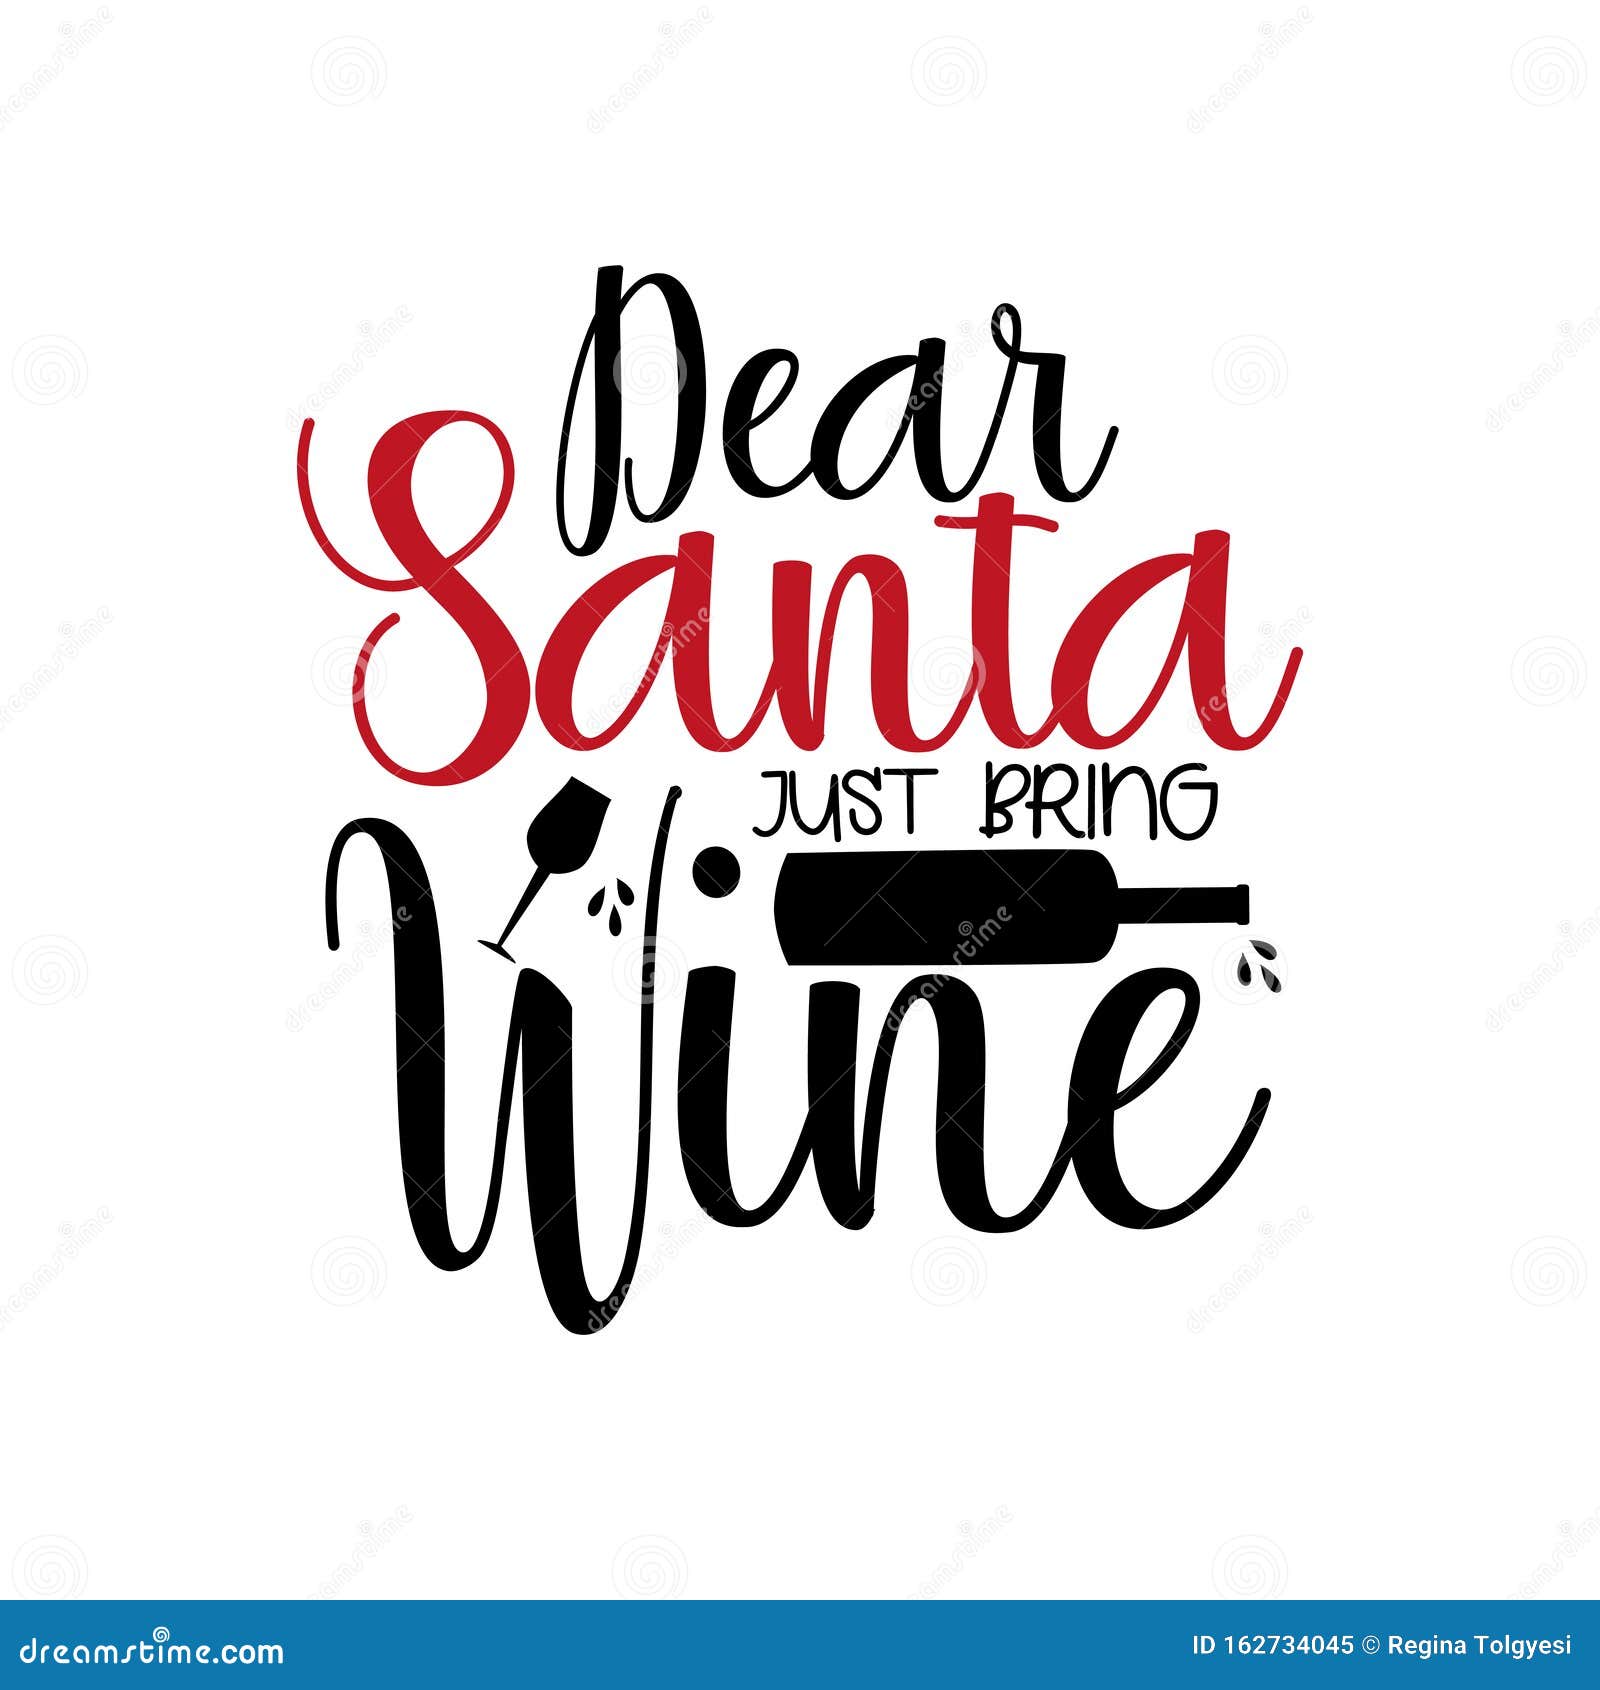 dear santa just bring wine- funny christmas text, with bottle and glass silhouette.